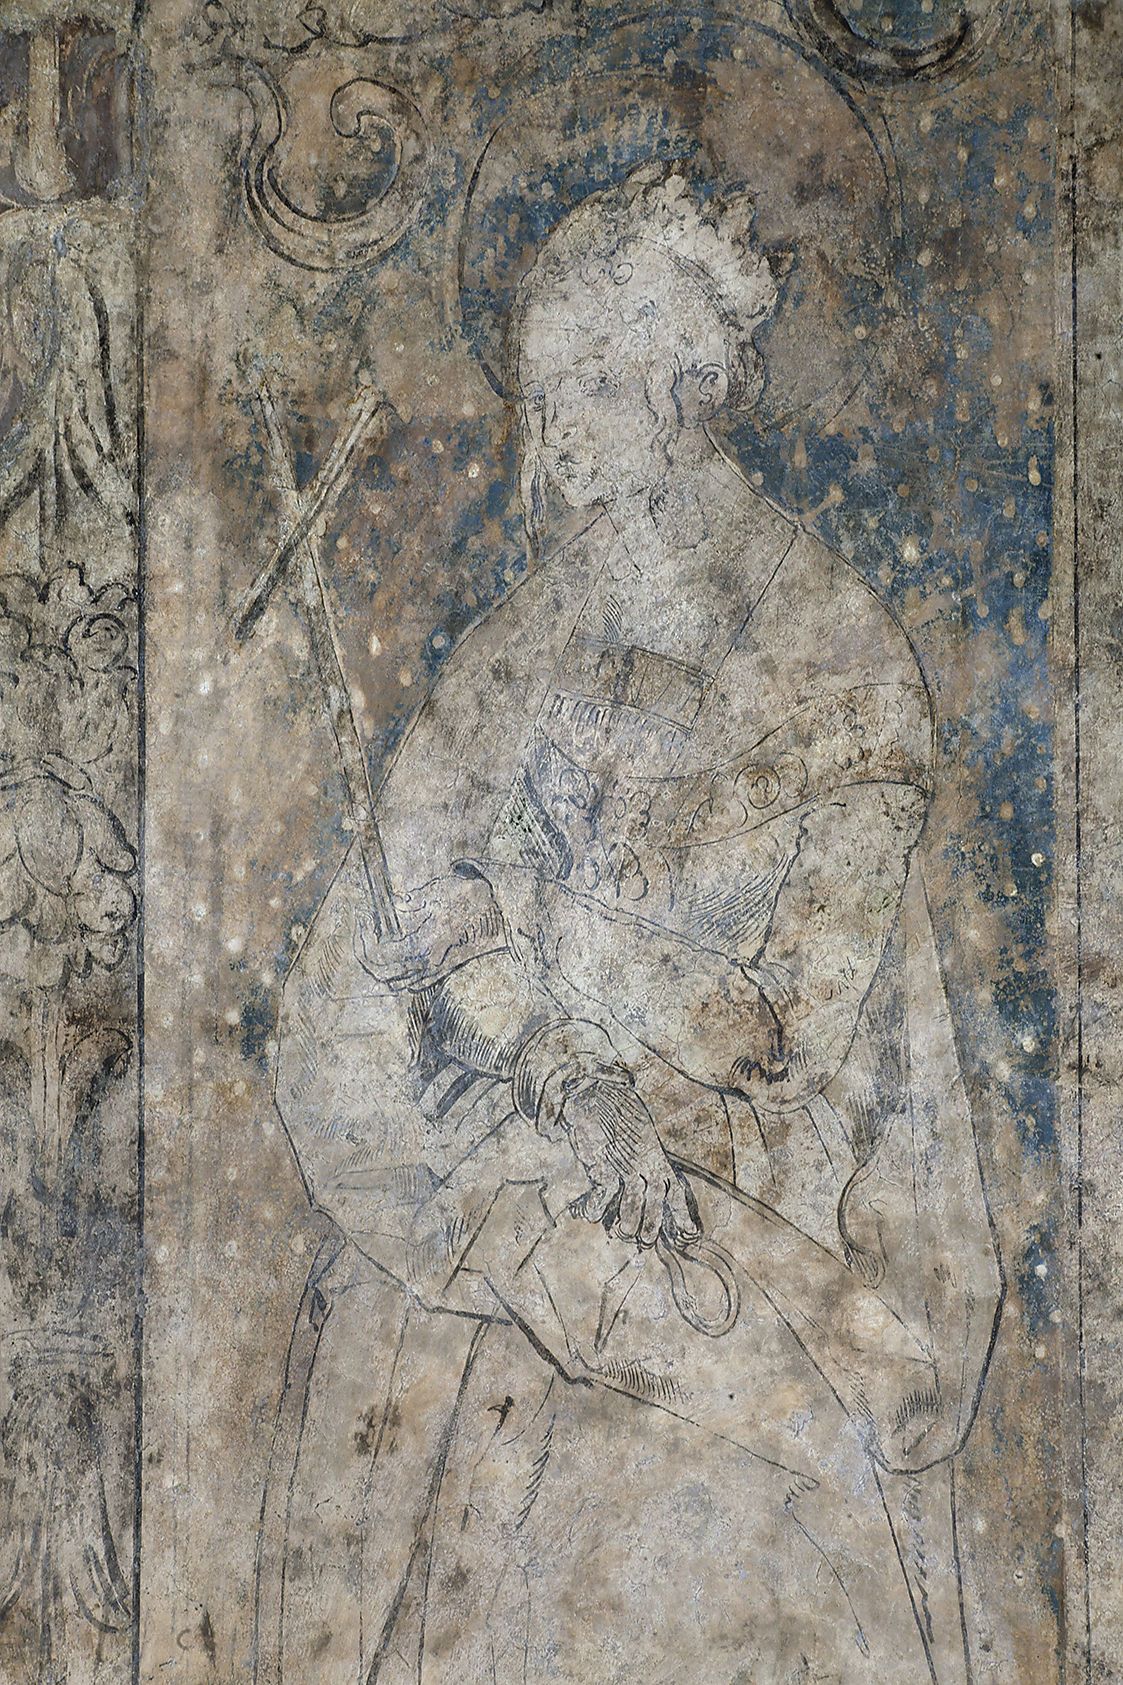 The underdrawing in this painting of St. Margaret at St. Stephen's Cathedral, Vienna, is likely the work of Albrecht Dürer. Photo © Dombauhütte zu St Stephan.